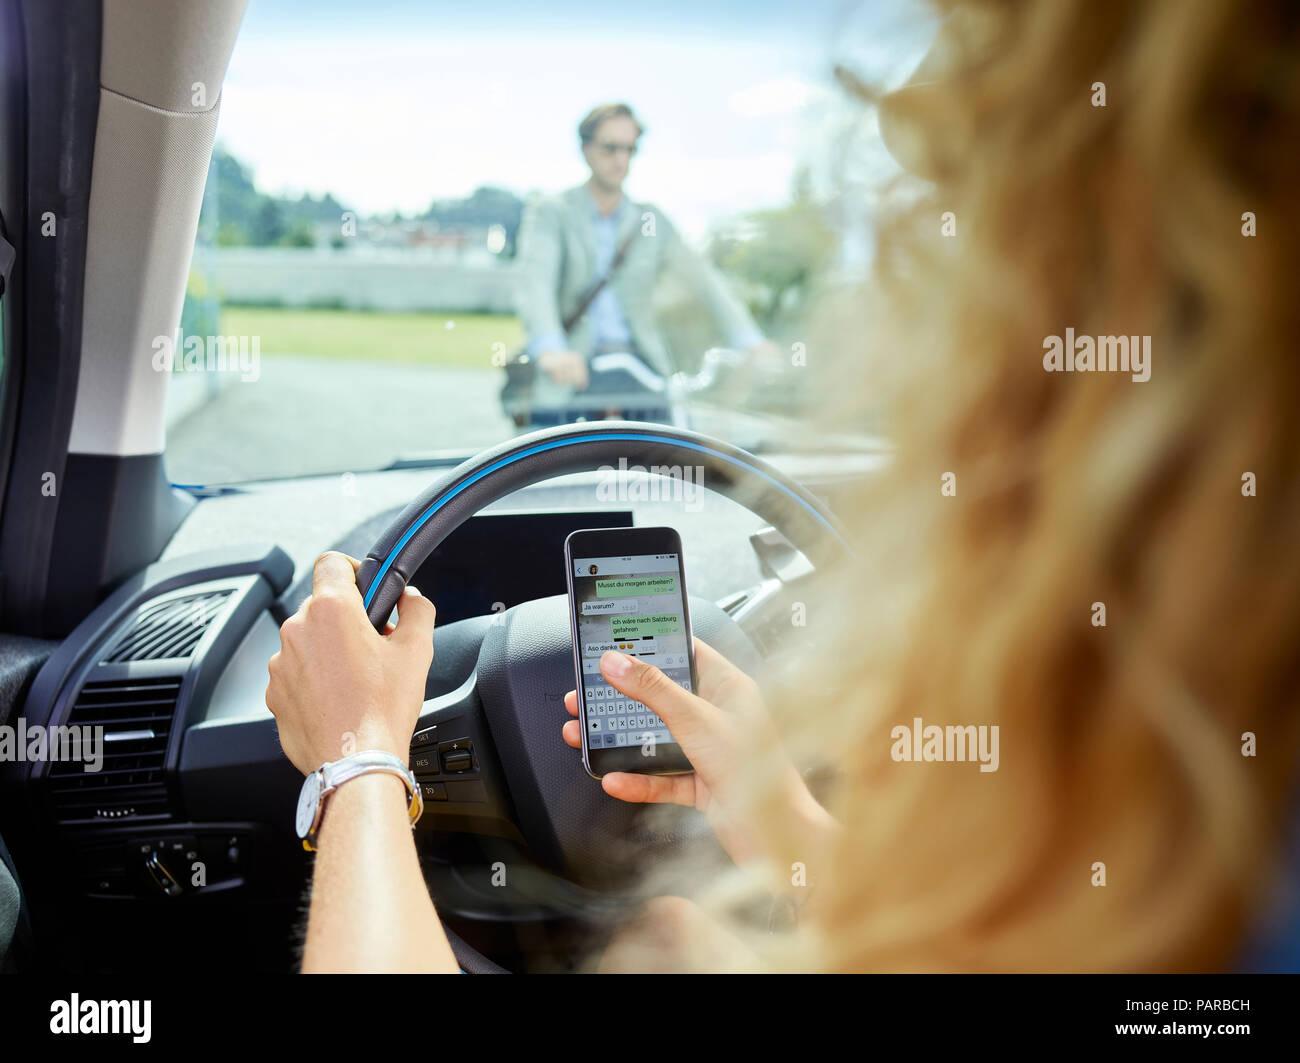 Young woman in electric car texting on cell phone Stock Photo